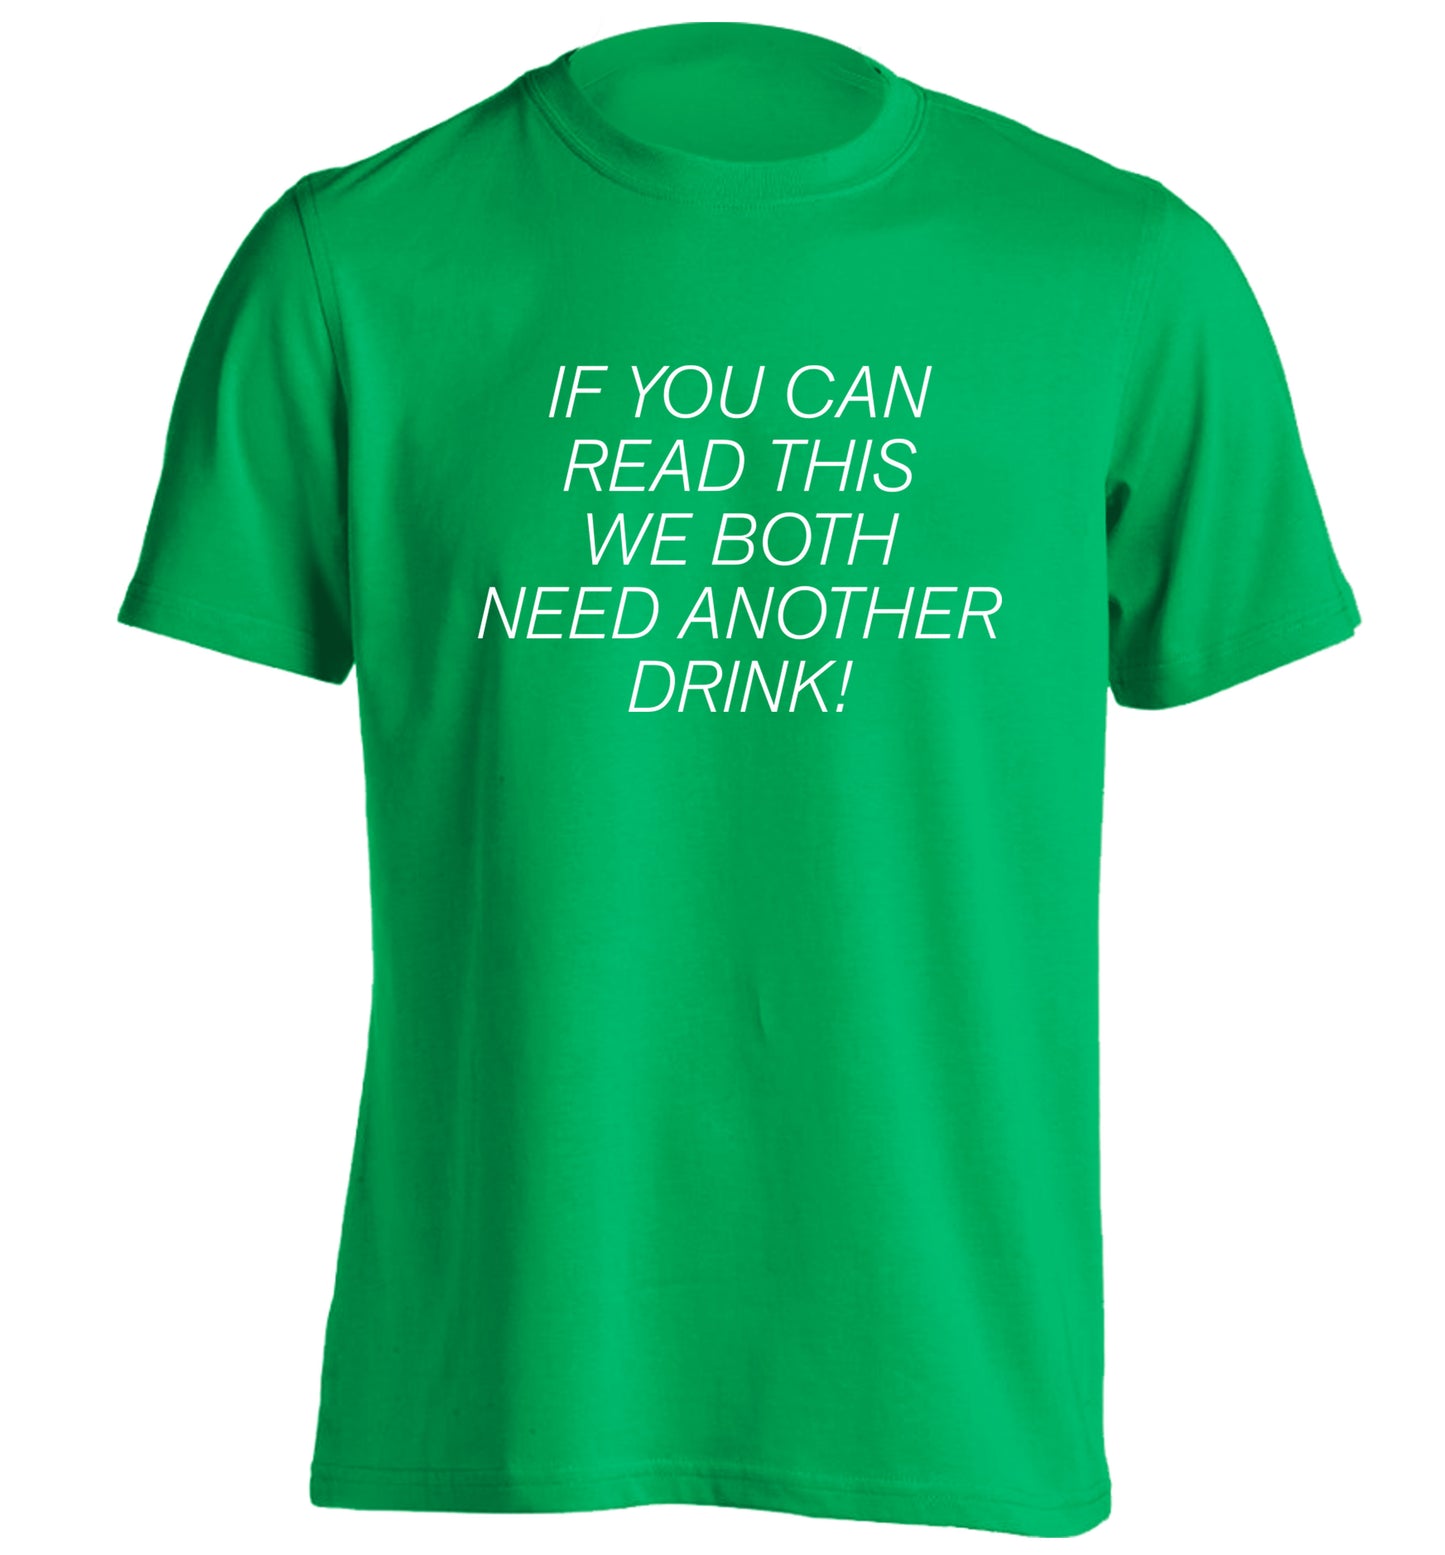 If you can read this we both need another drink! adults unisex green Tshirt 2XL